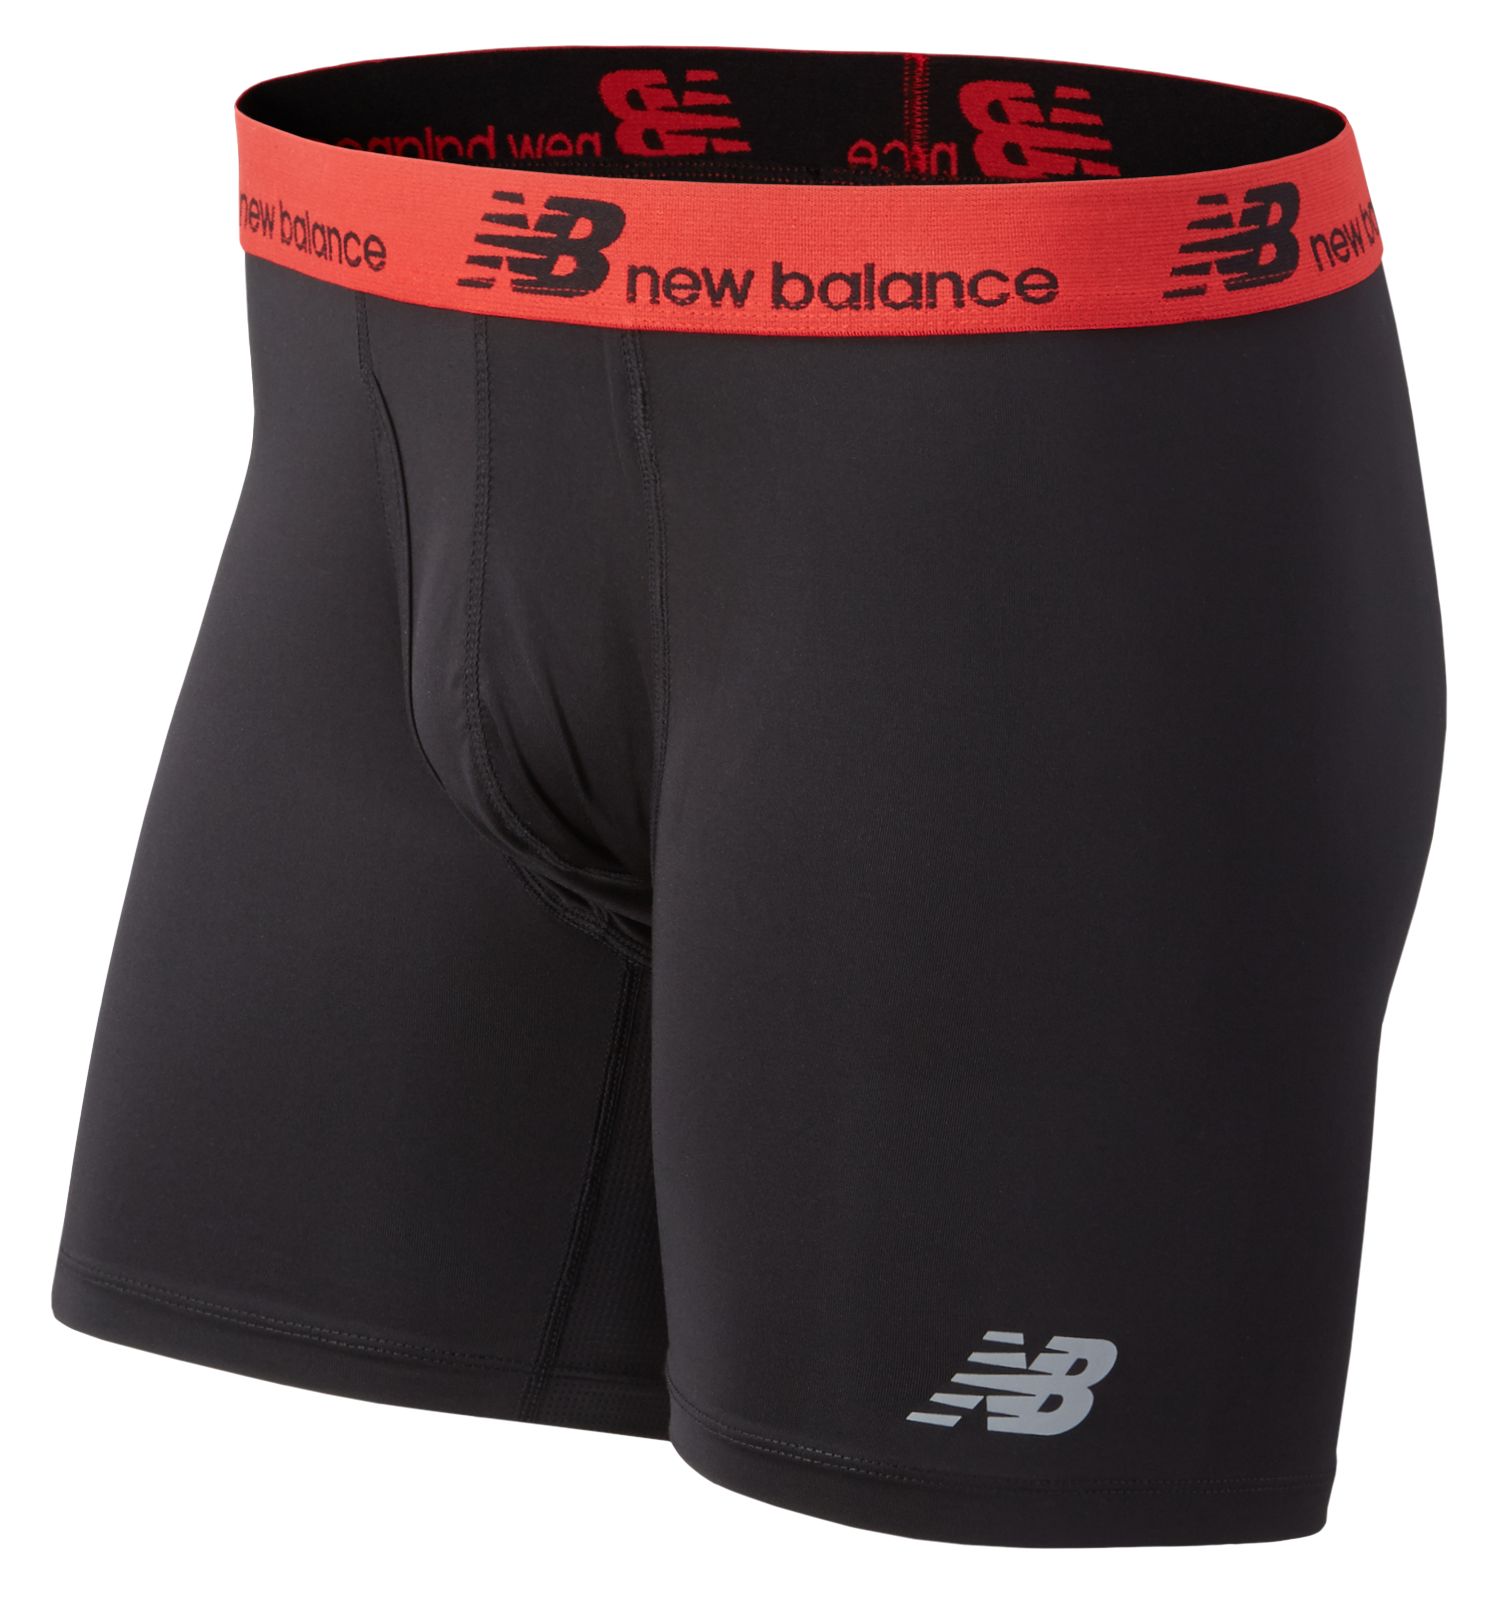 Men’s Athletic Workout Gear - New Balance